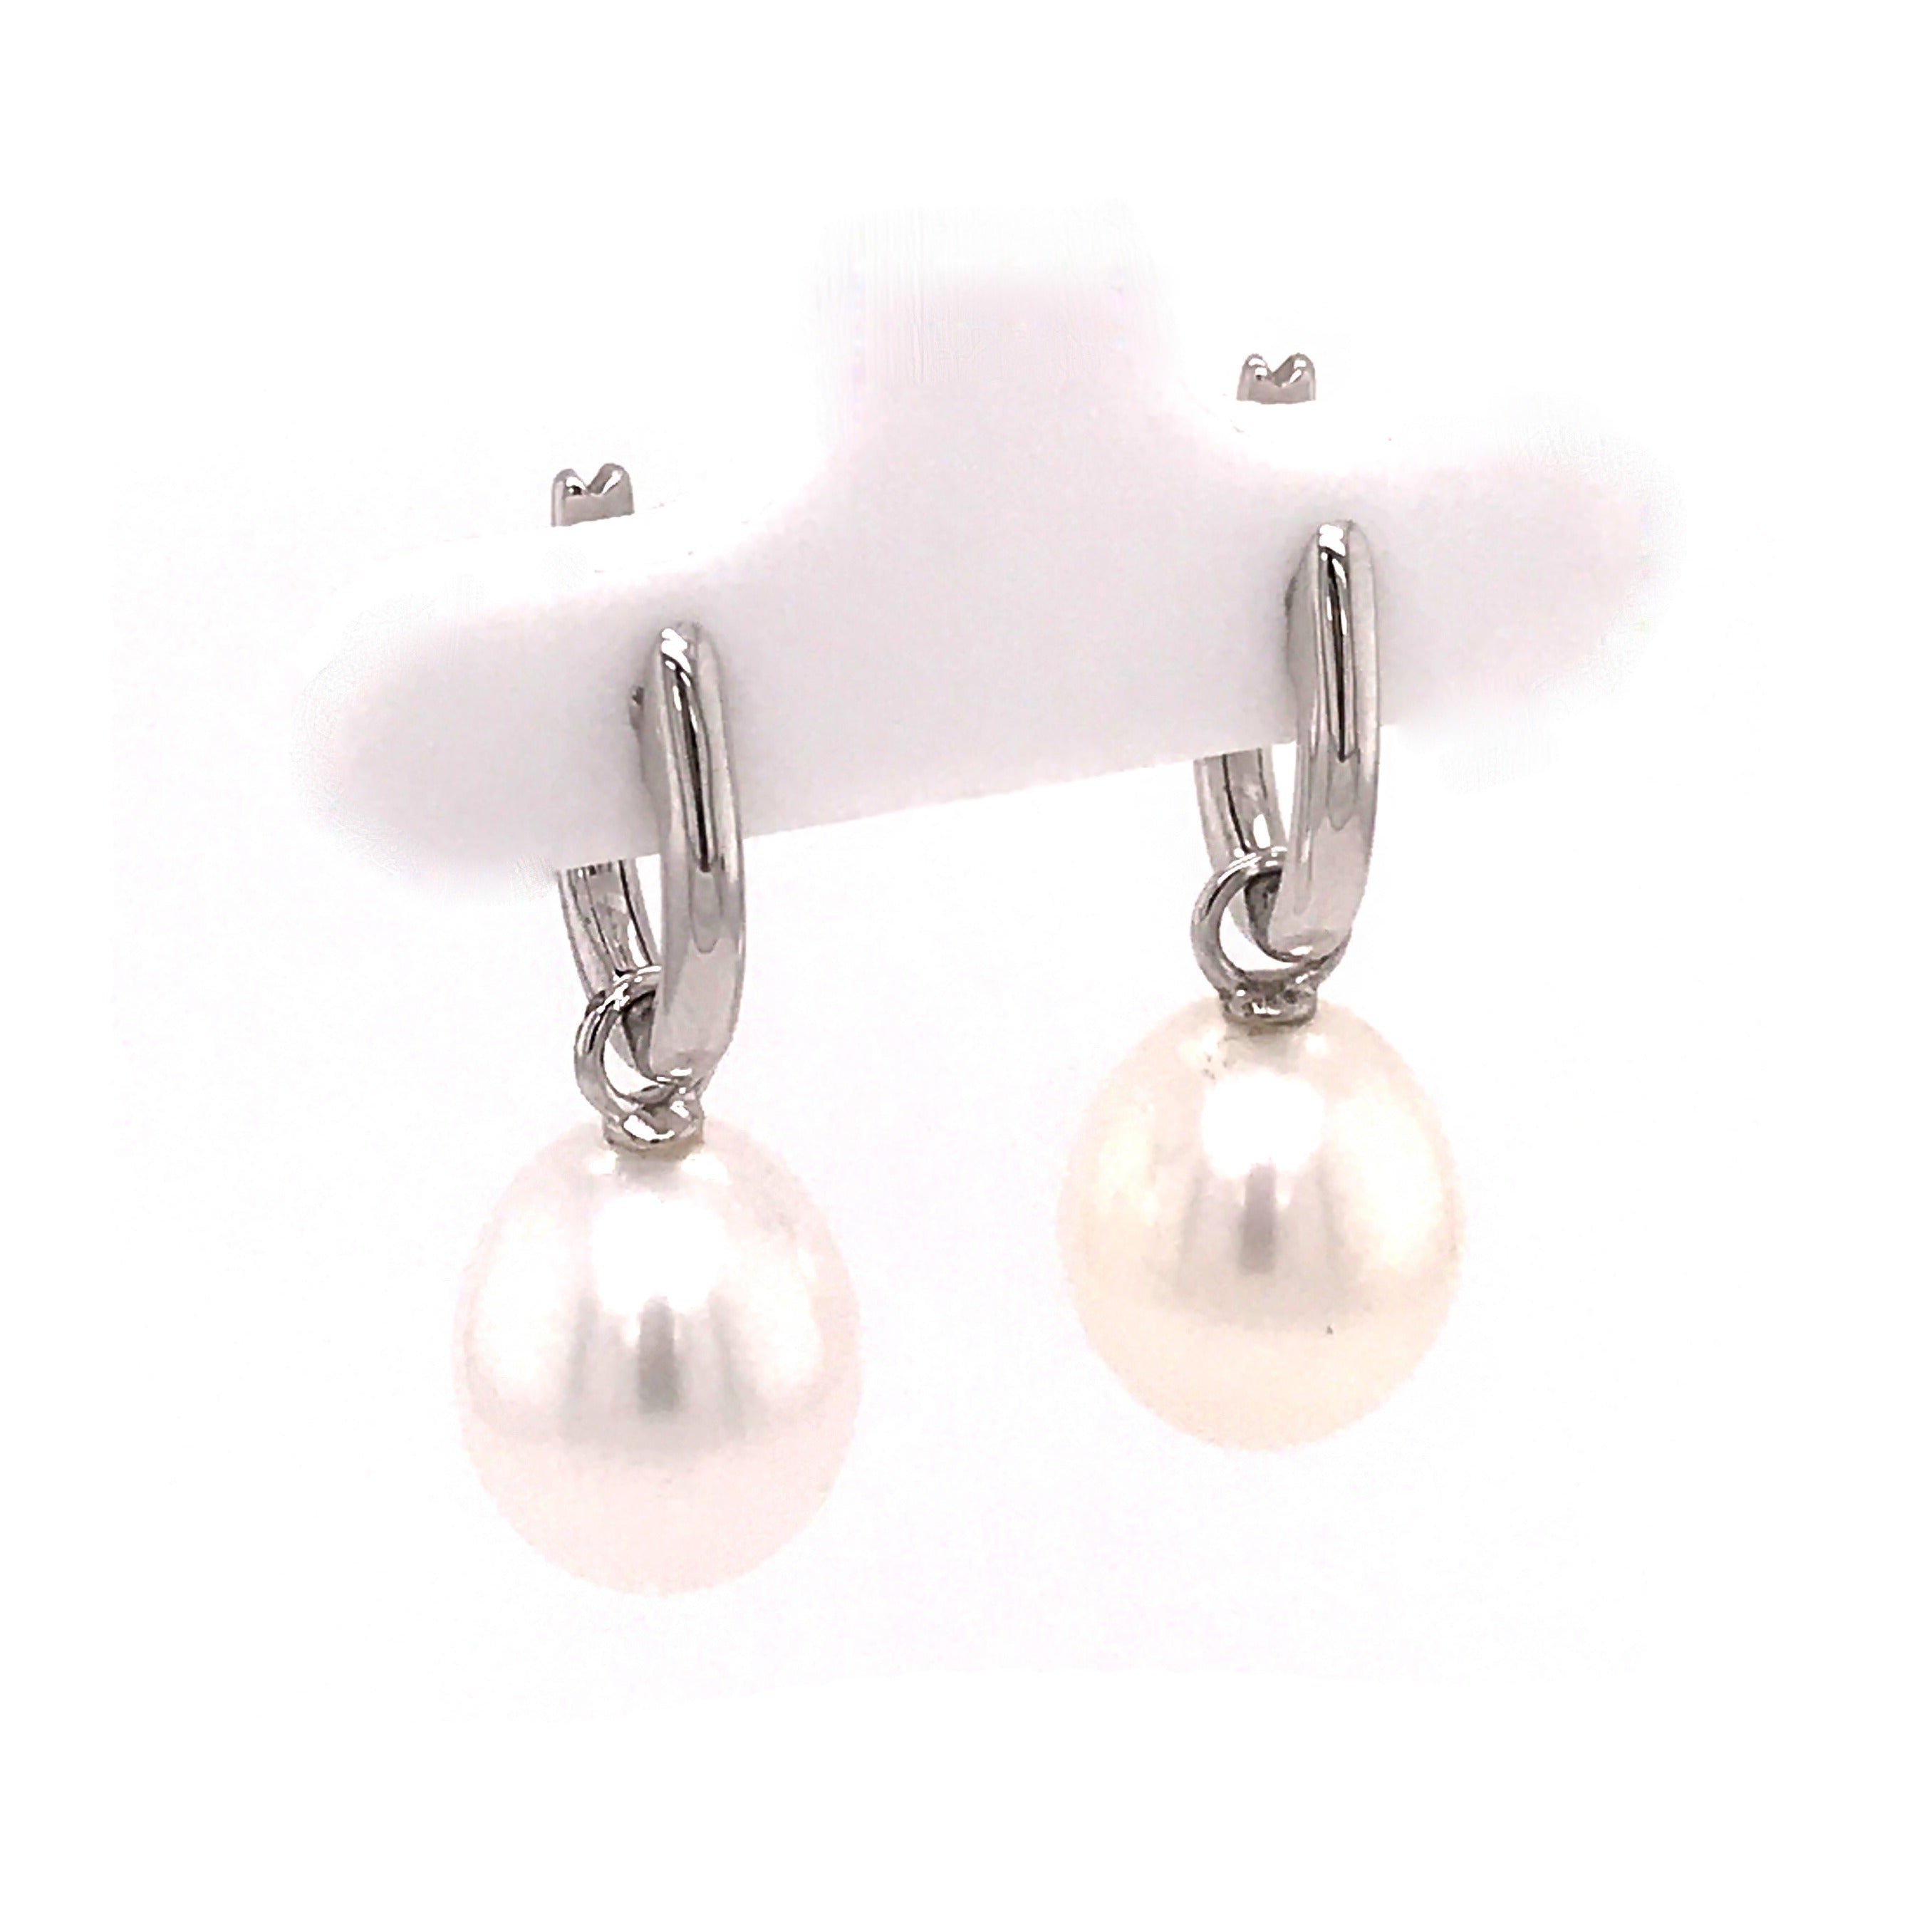 9ct White Gold Hoop Earrings with Detachable Drop Pearls